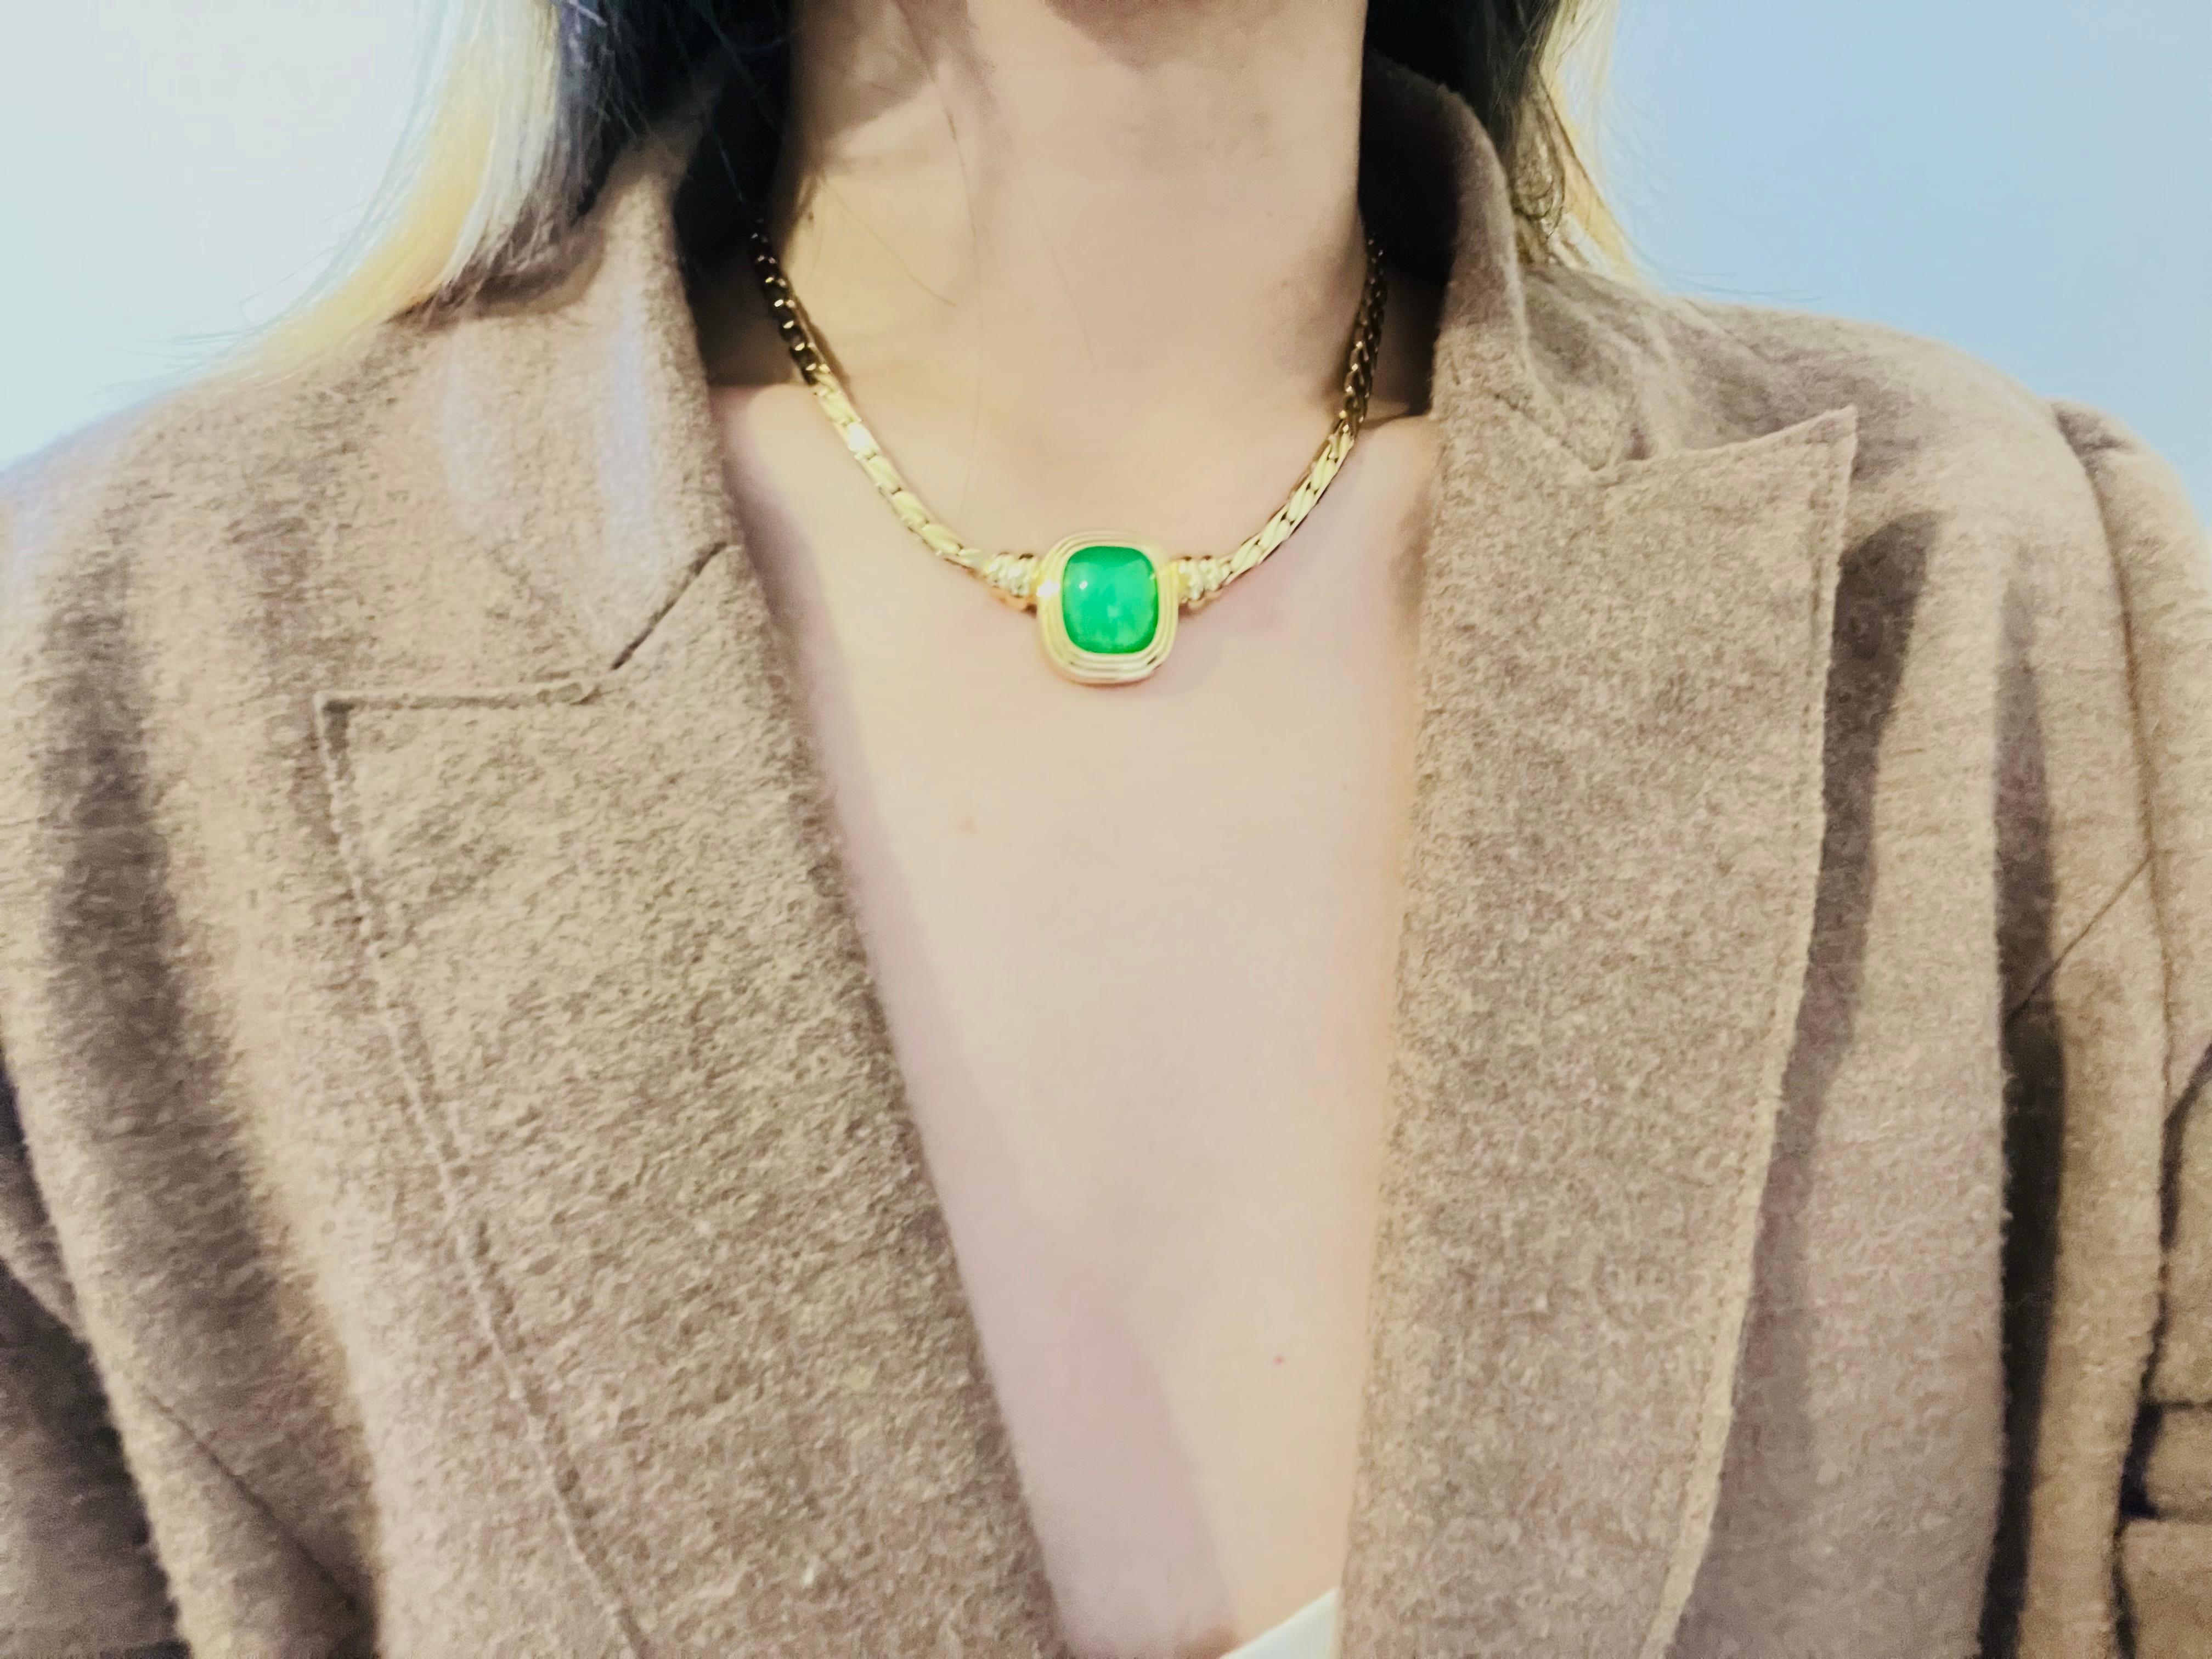 Women's Christian Dior Vintage 1980s Emerald Green Rectangle Cabochon Pendant Necklace For Sale